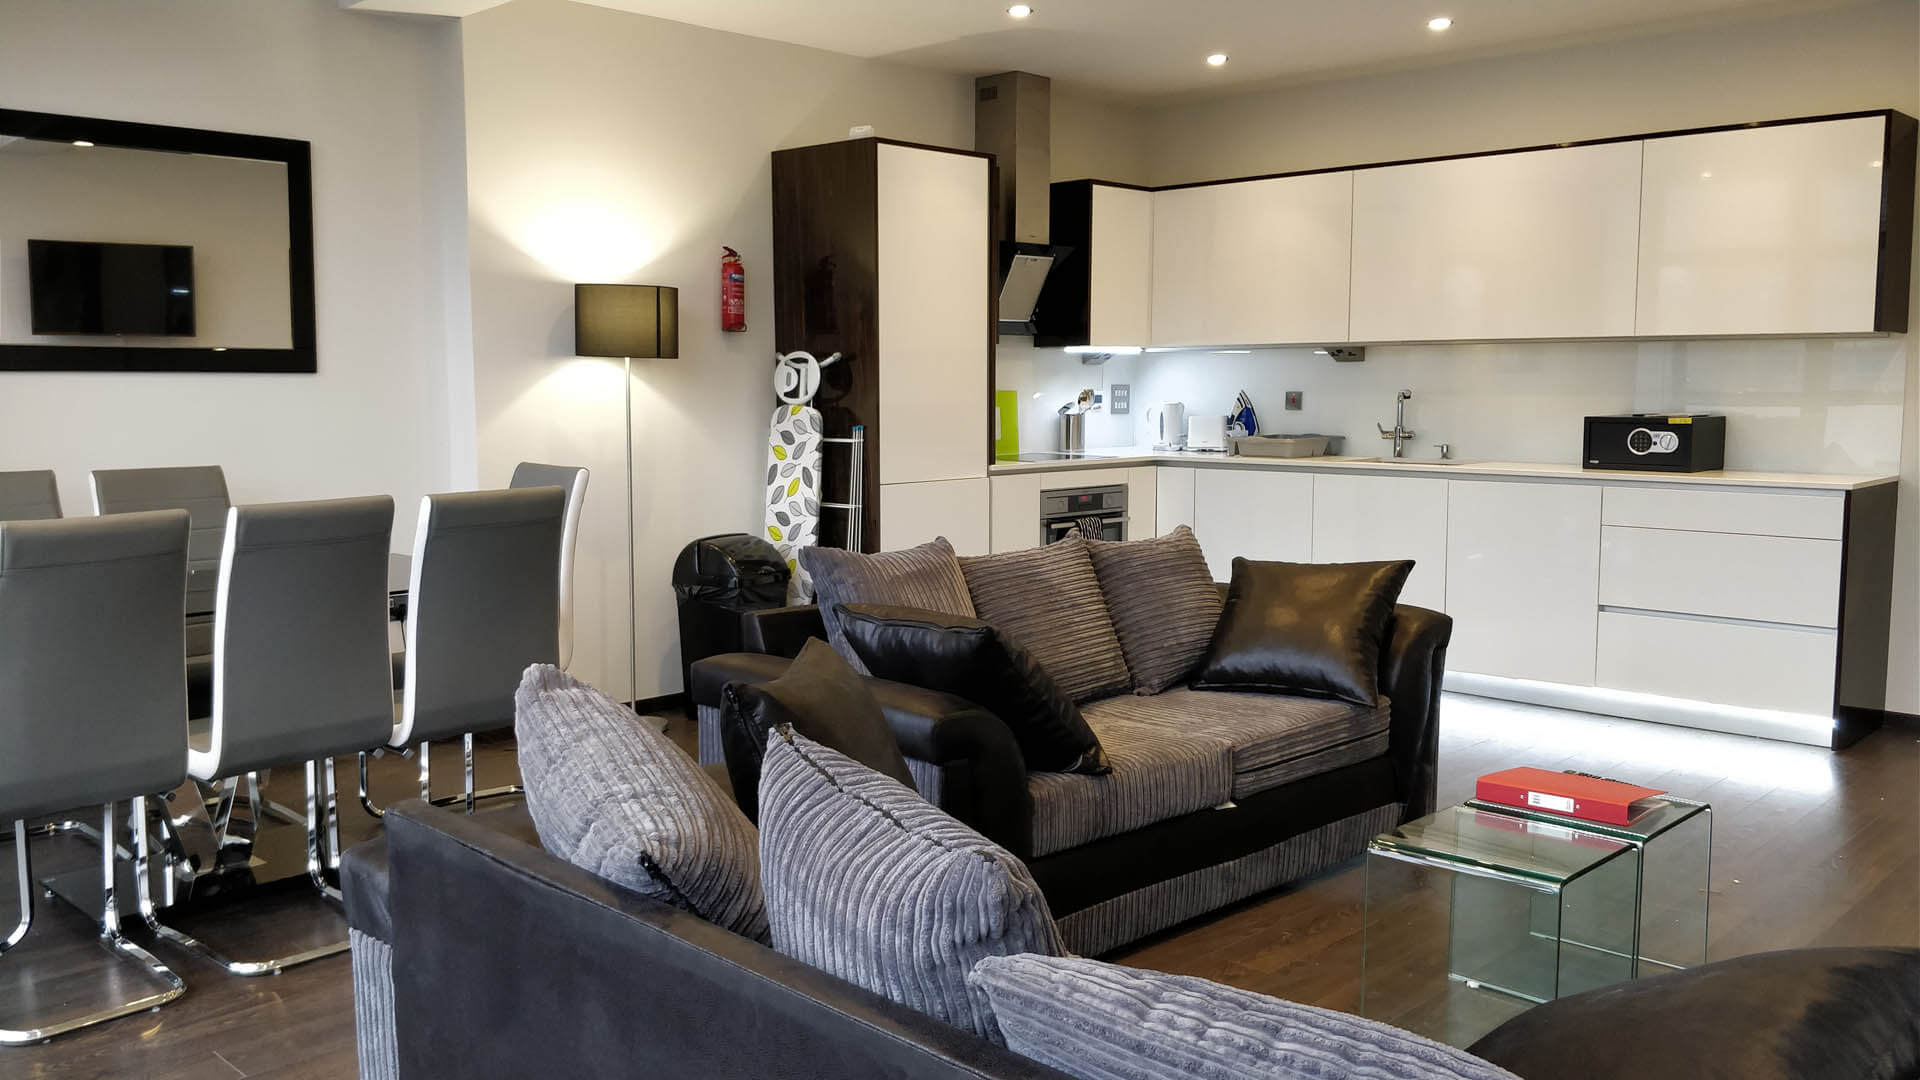 Book Tower Hill Luxury Apartments located in Aldgate.Close to East End's Shoreditch and Bricklane! Free Wfii, spacious living area & Weekly housekeeping!